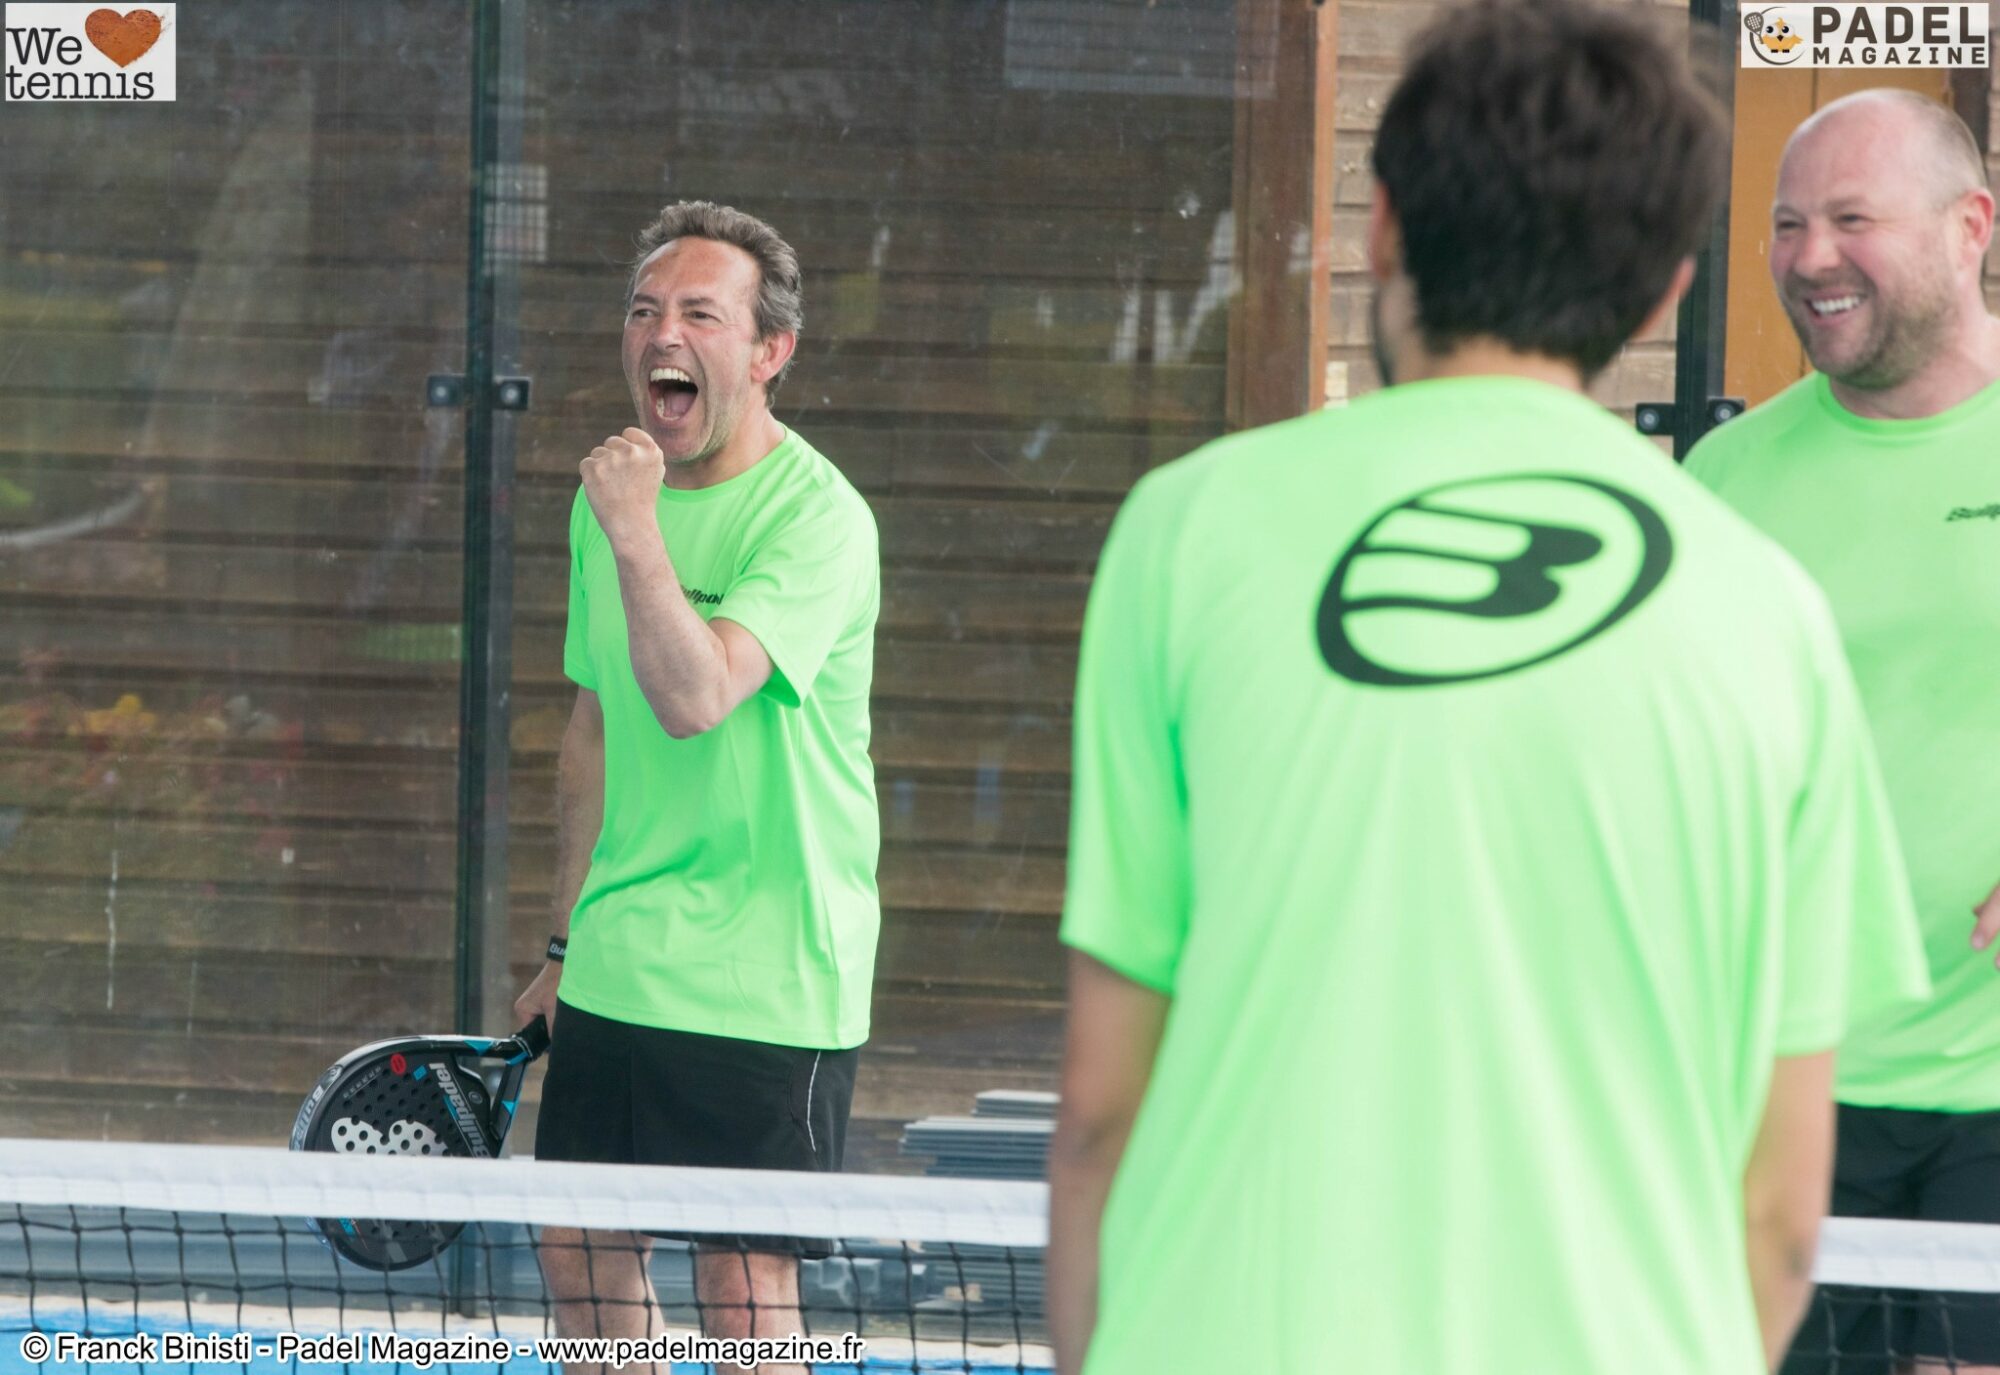 The will to win at padel